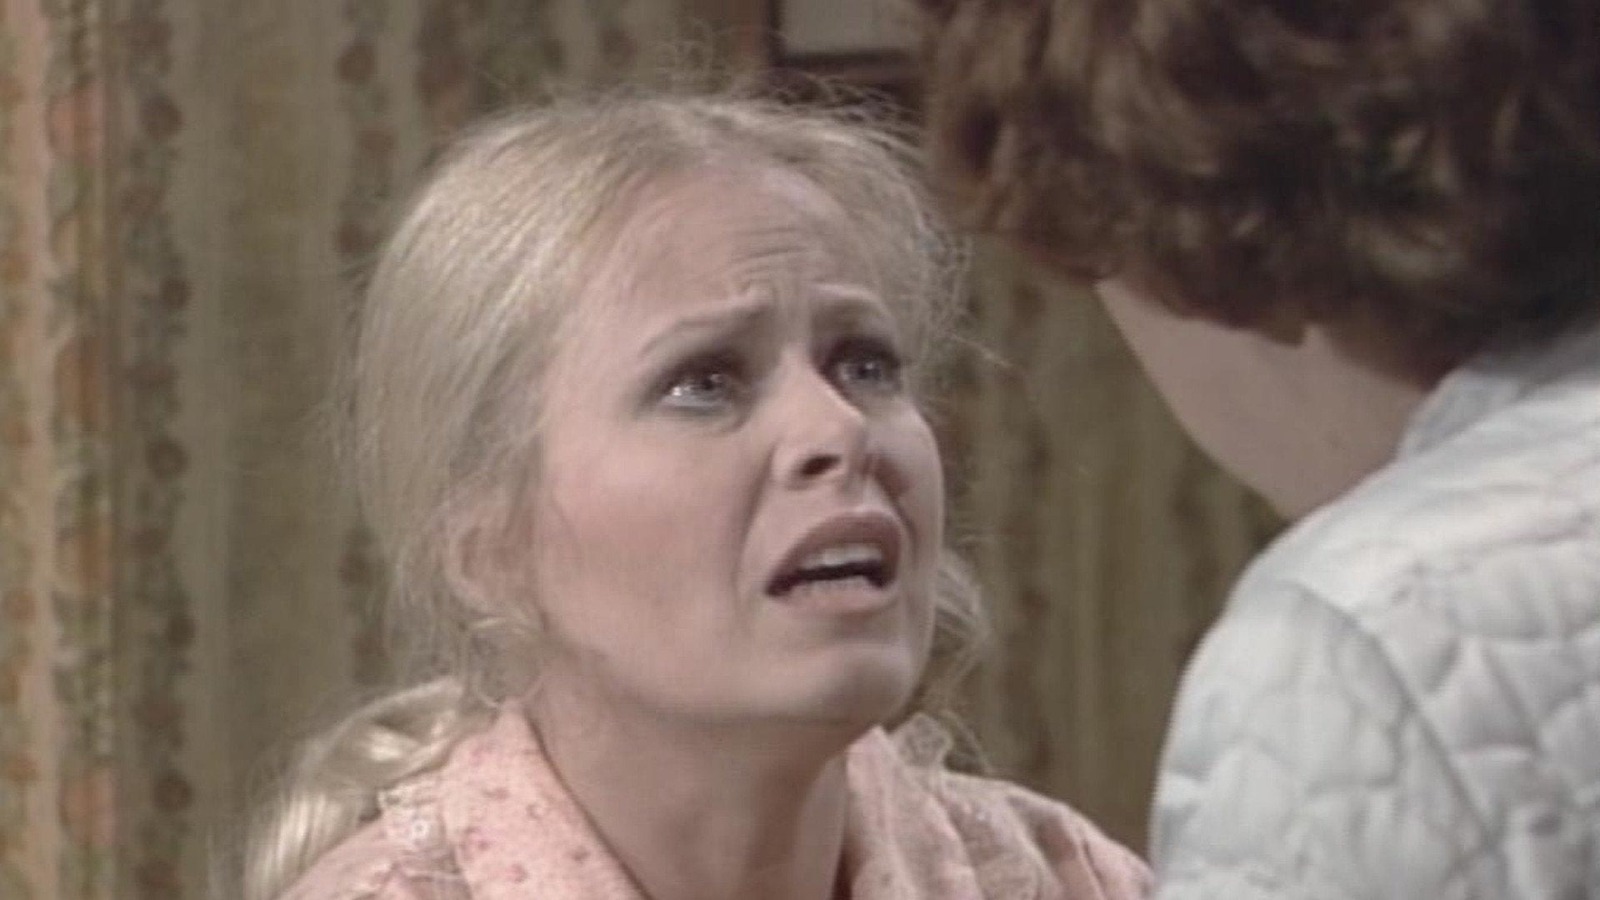 How All In The Family Turned Sally Struthers’ Life ‘Upside Down’